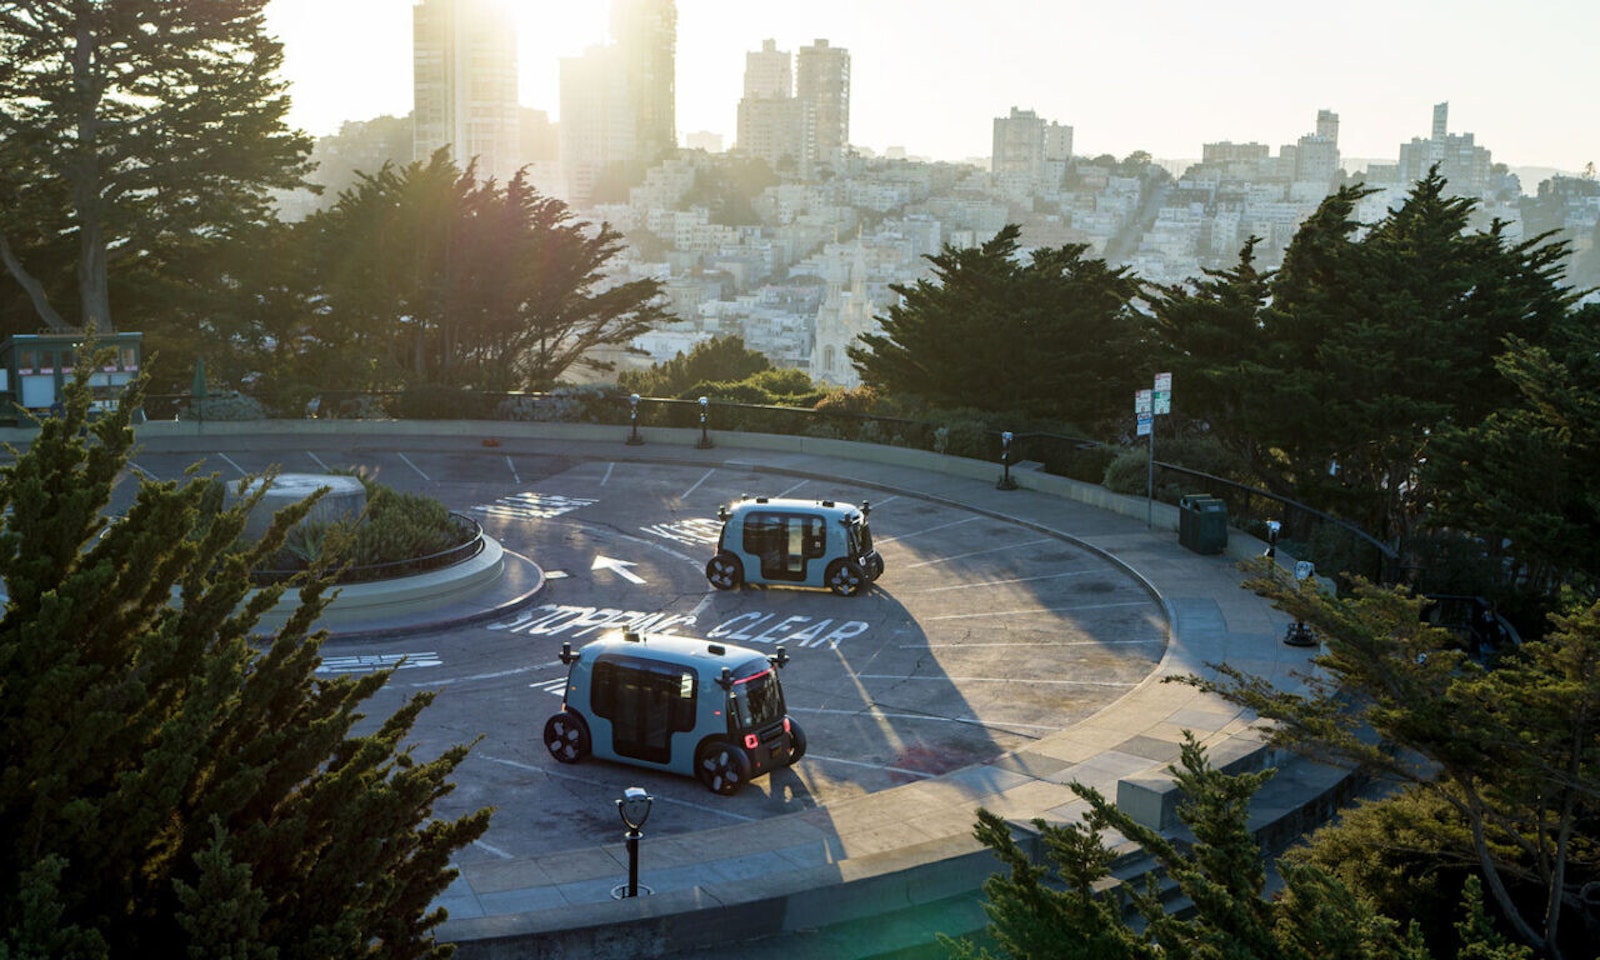 Zoox robotaxis parked at Coit Tower